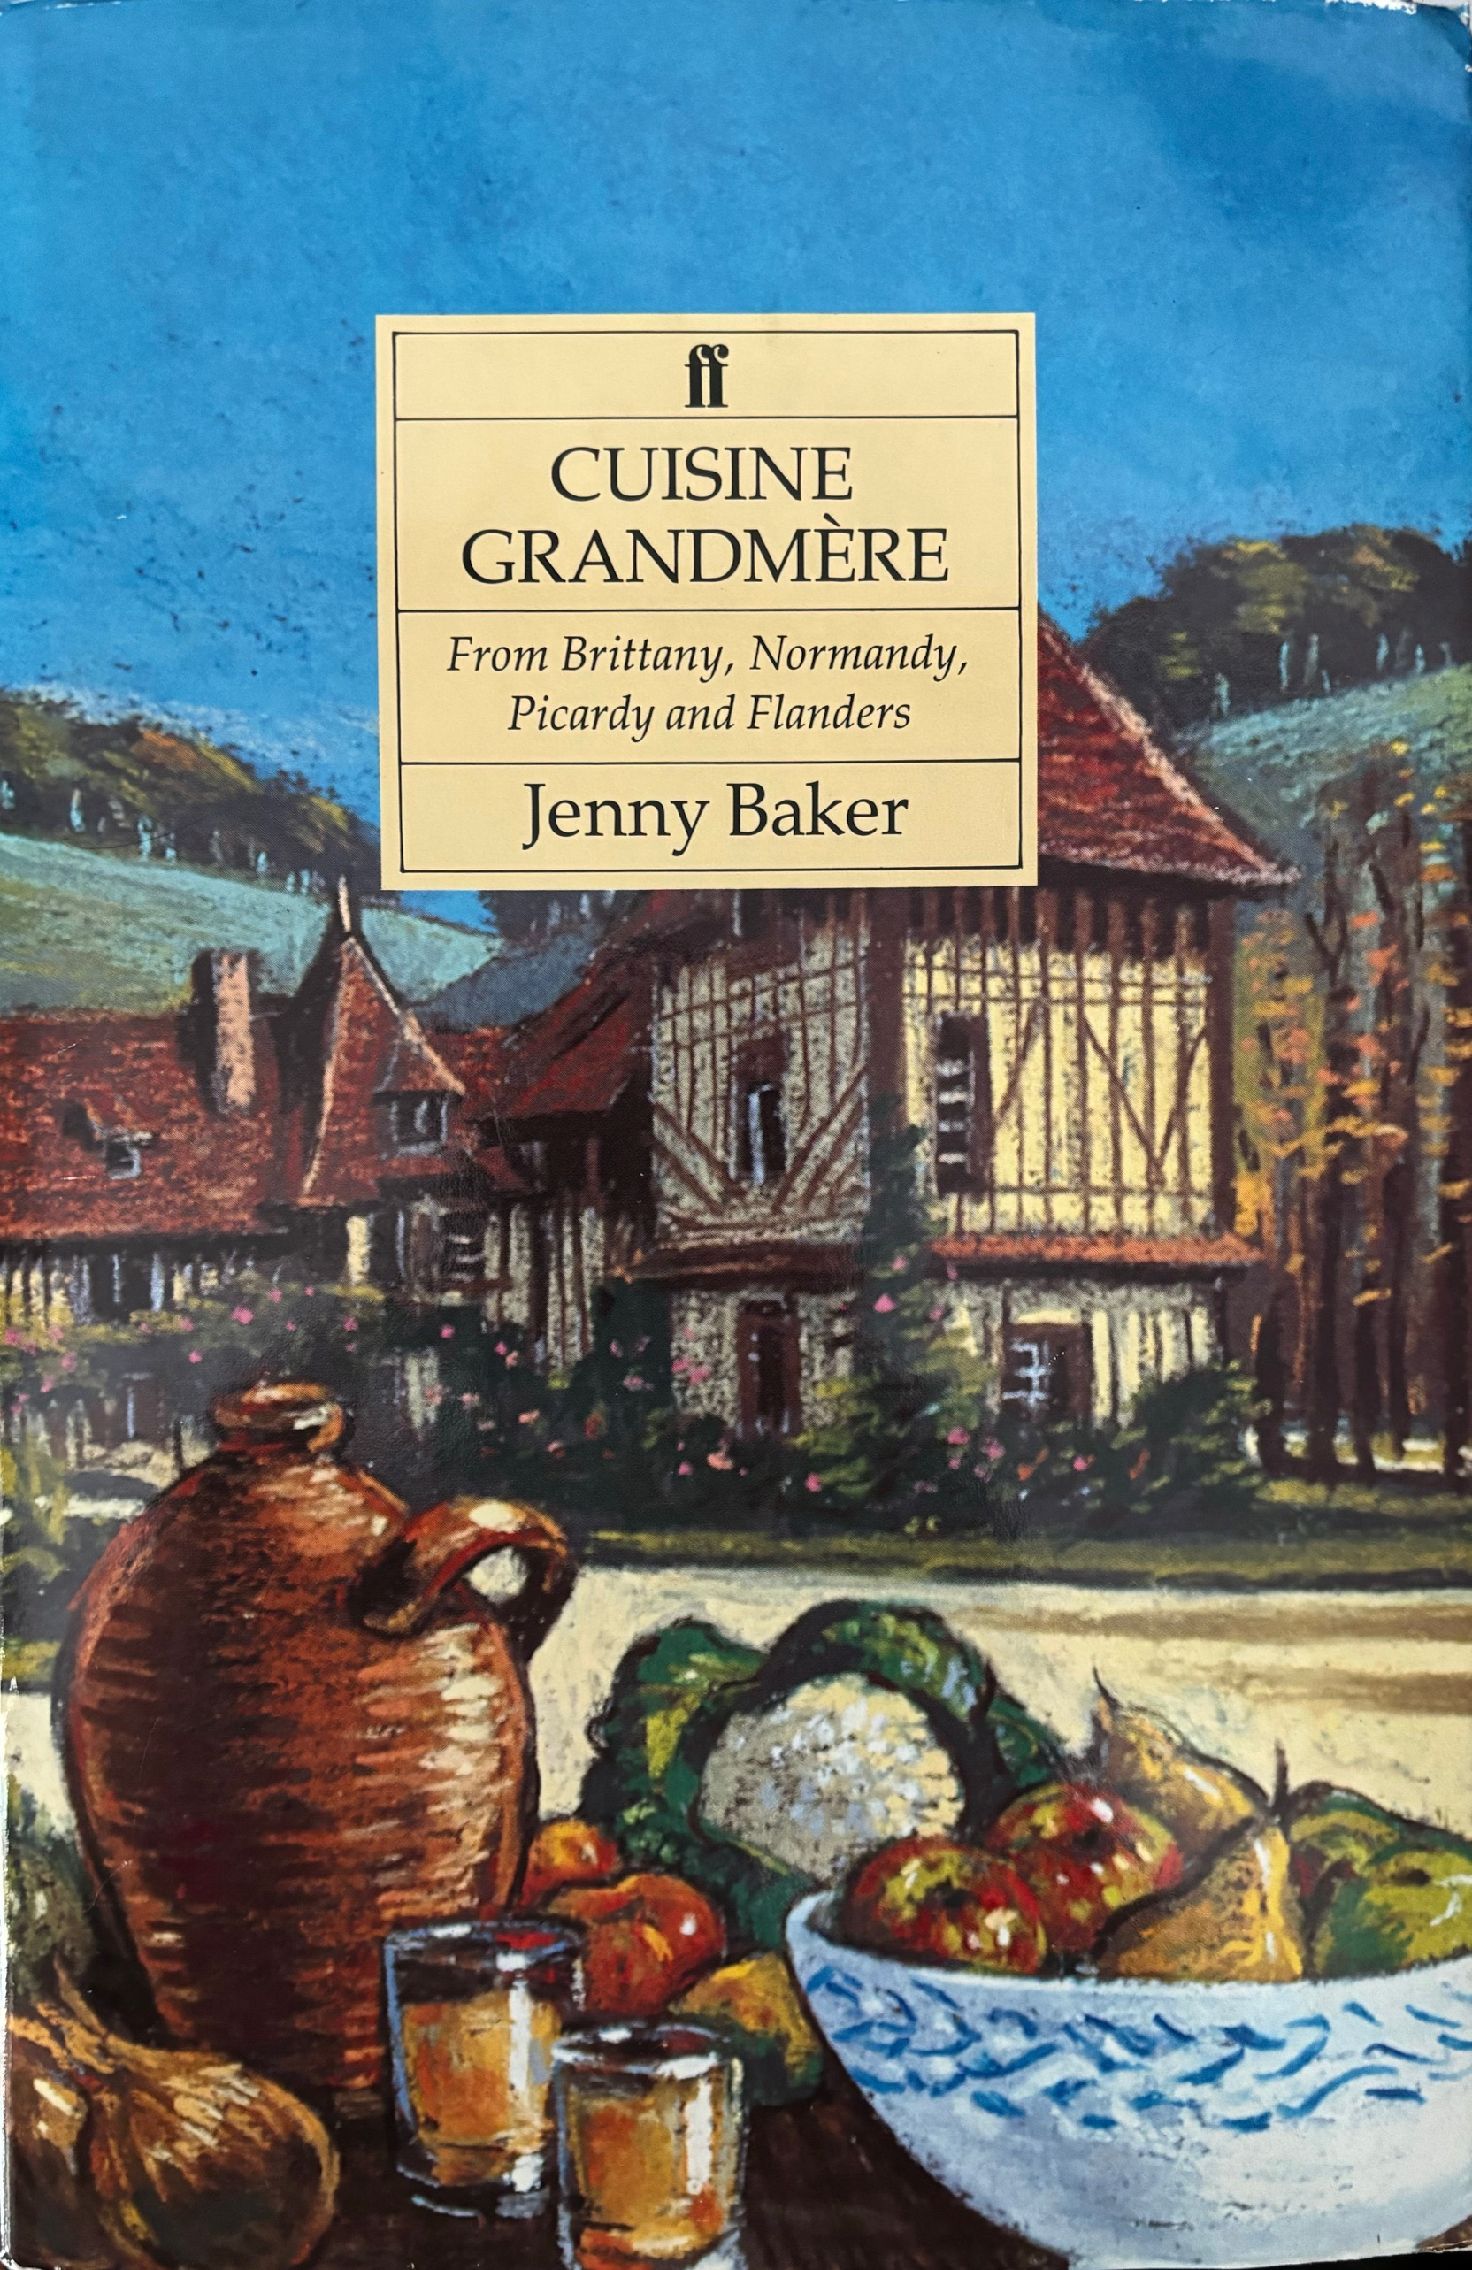 (French) Jenny Baker. Cuisine Grandmere from Brittany, Normandy, Picardy and Flanders